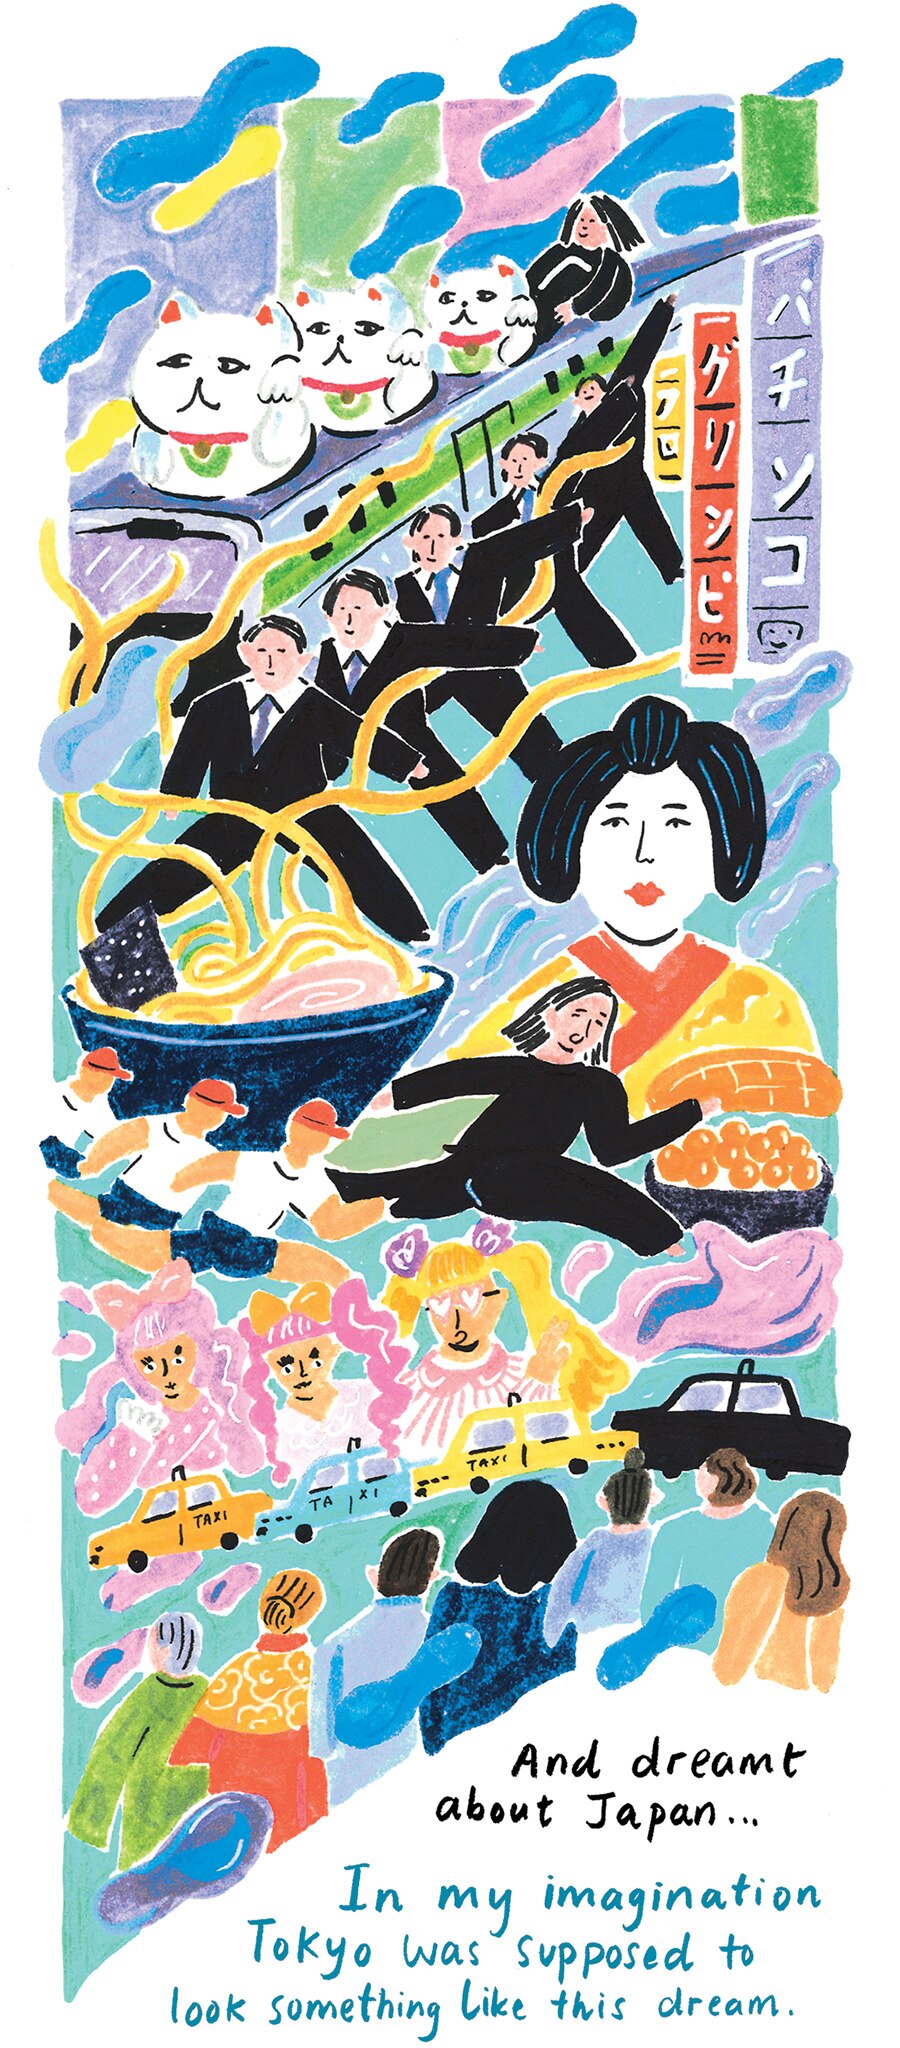 "I dreamt about Japan. In my imagination Tokyo was supposed to look something like this dream." Illustration of Japanese icons.